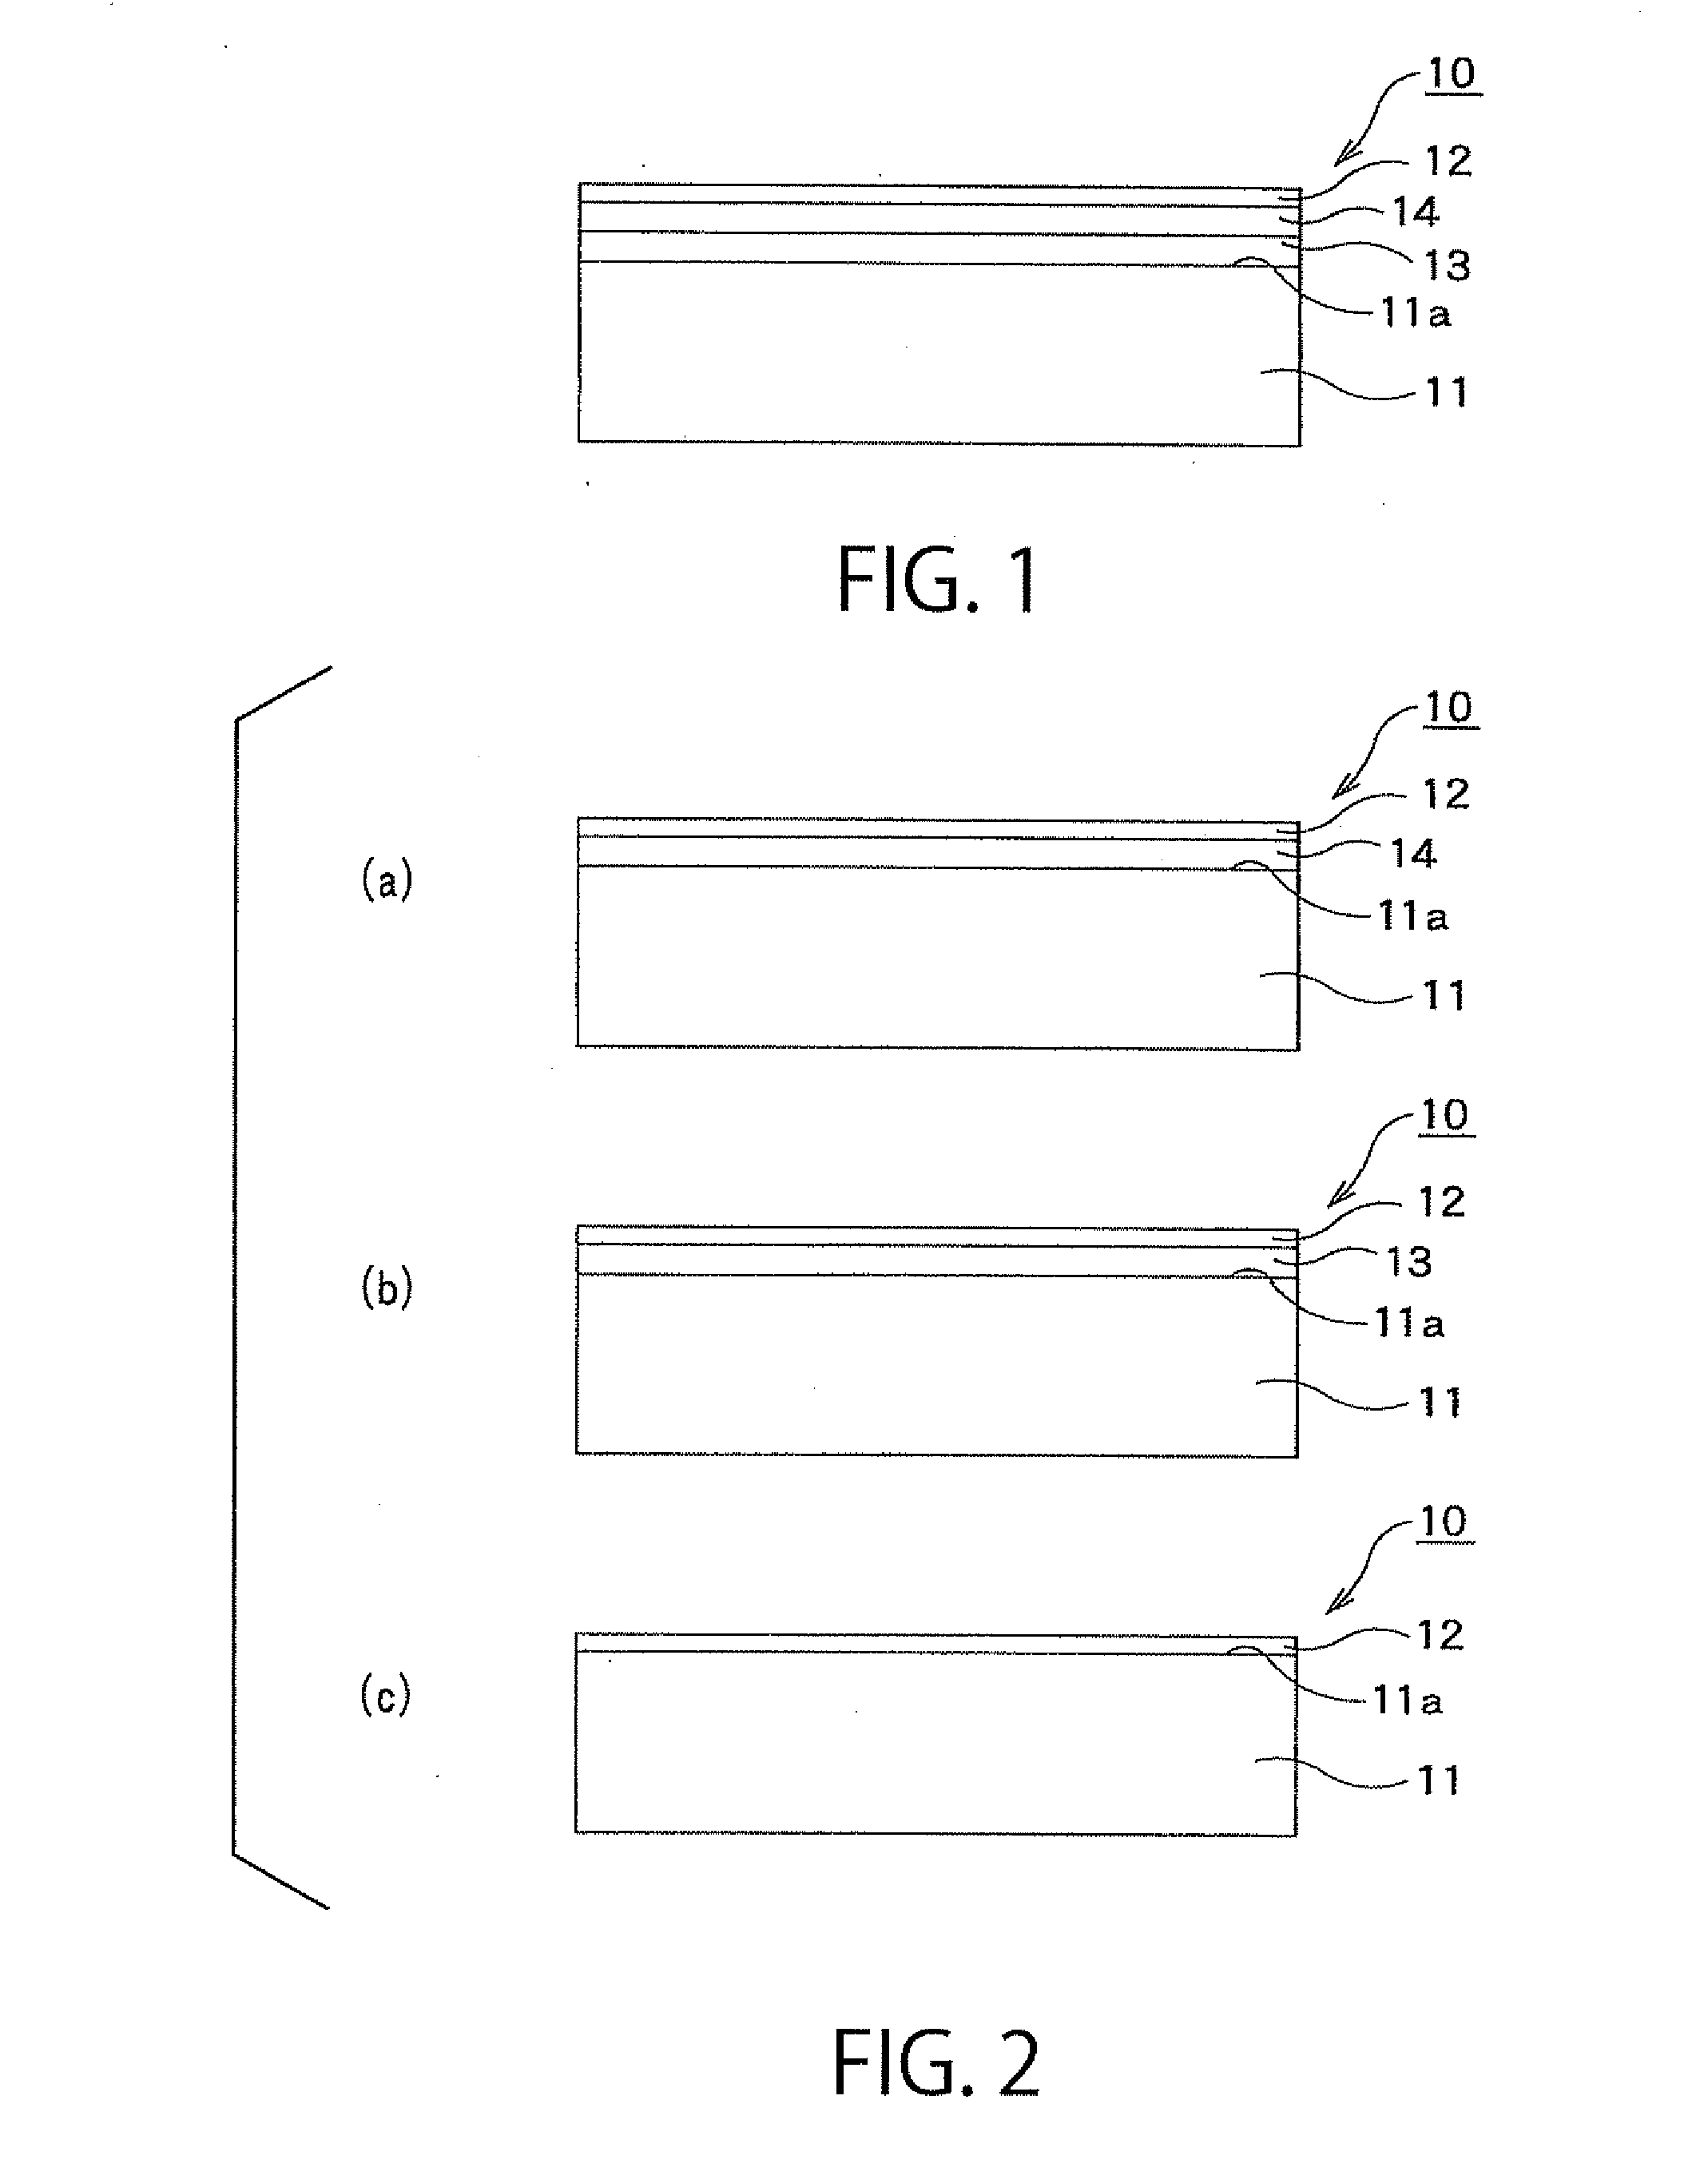 LED leadframe or LED substrate, semiconductor device, and method for manufacturing LED leadframe or LED substrate